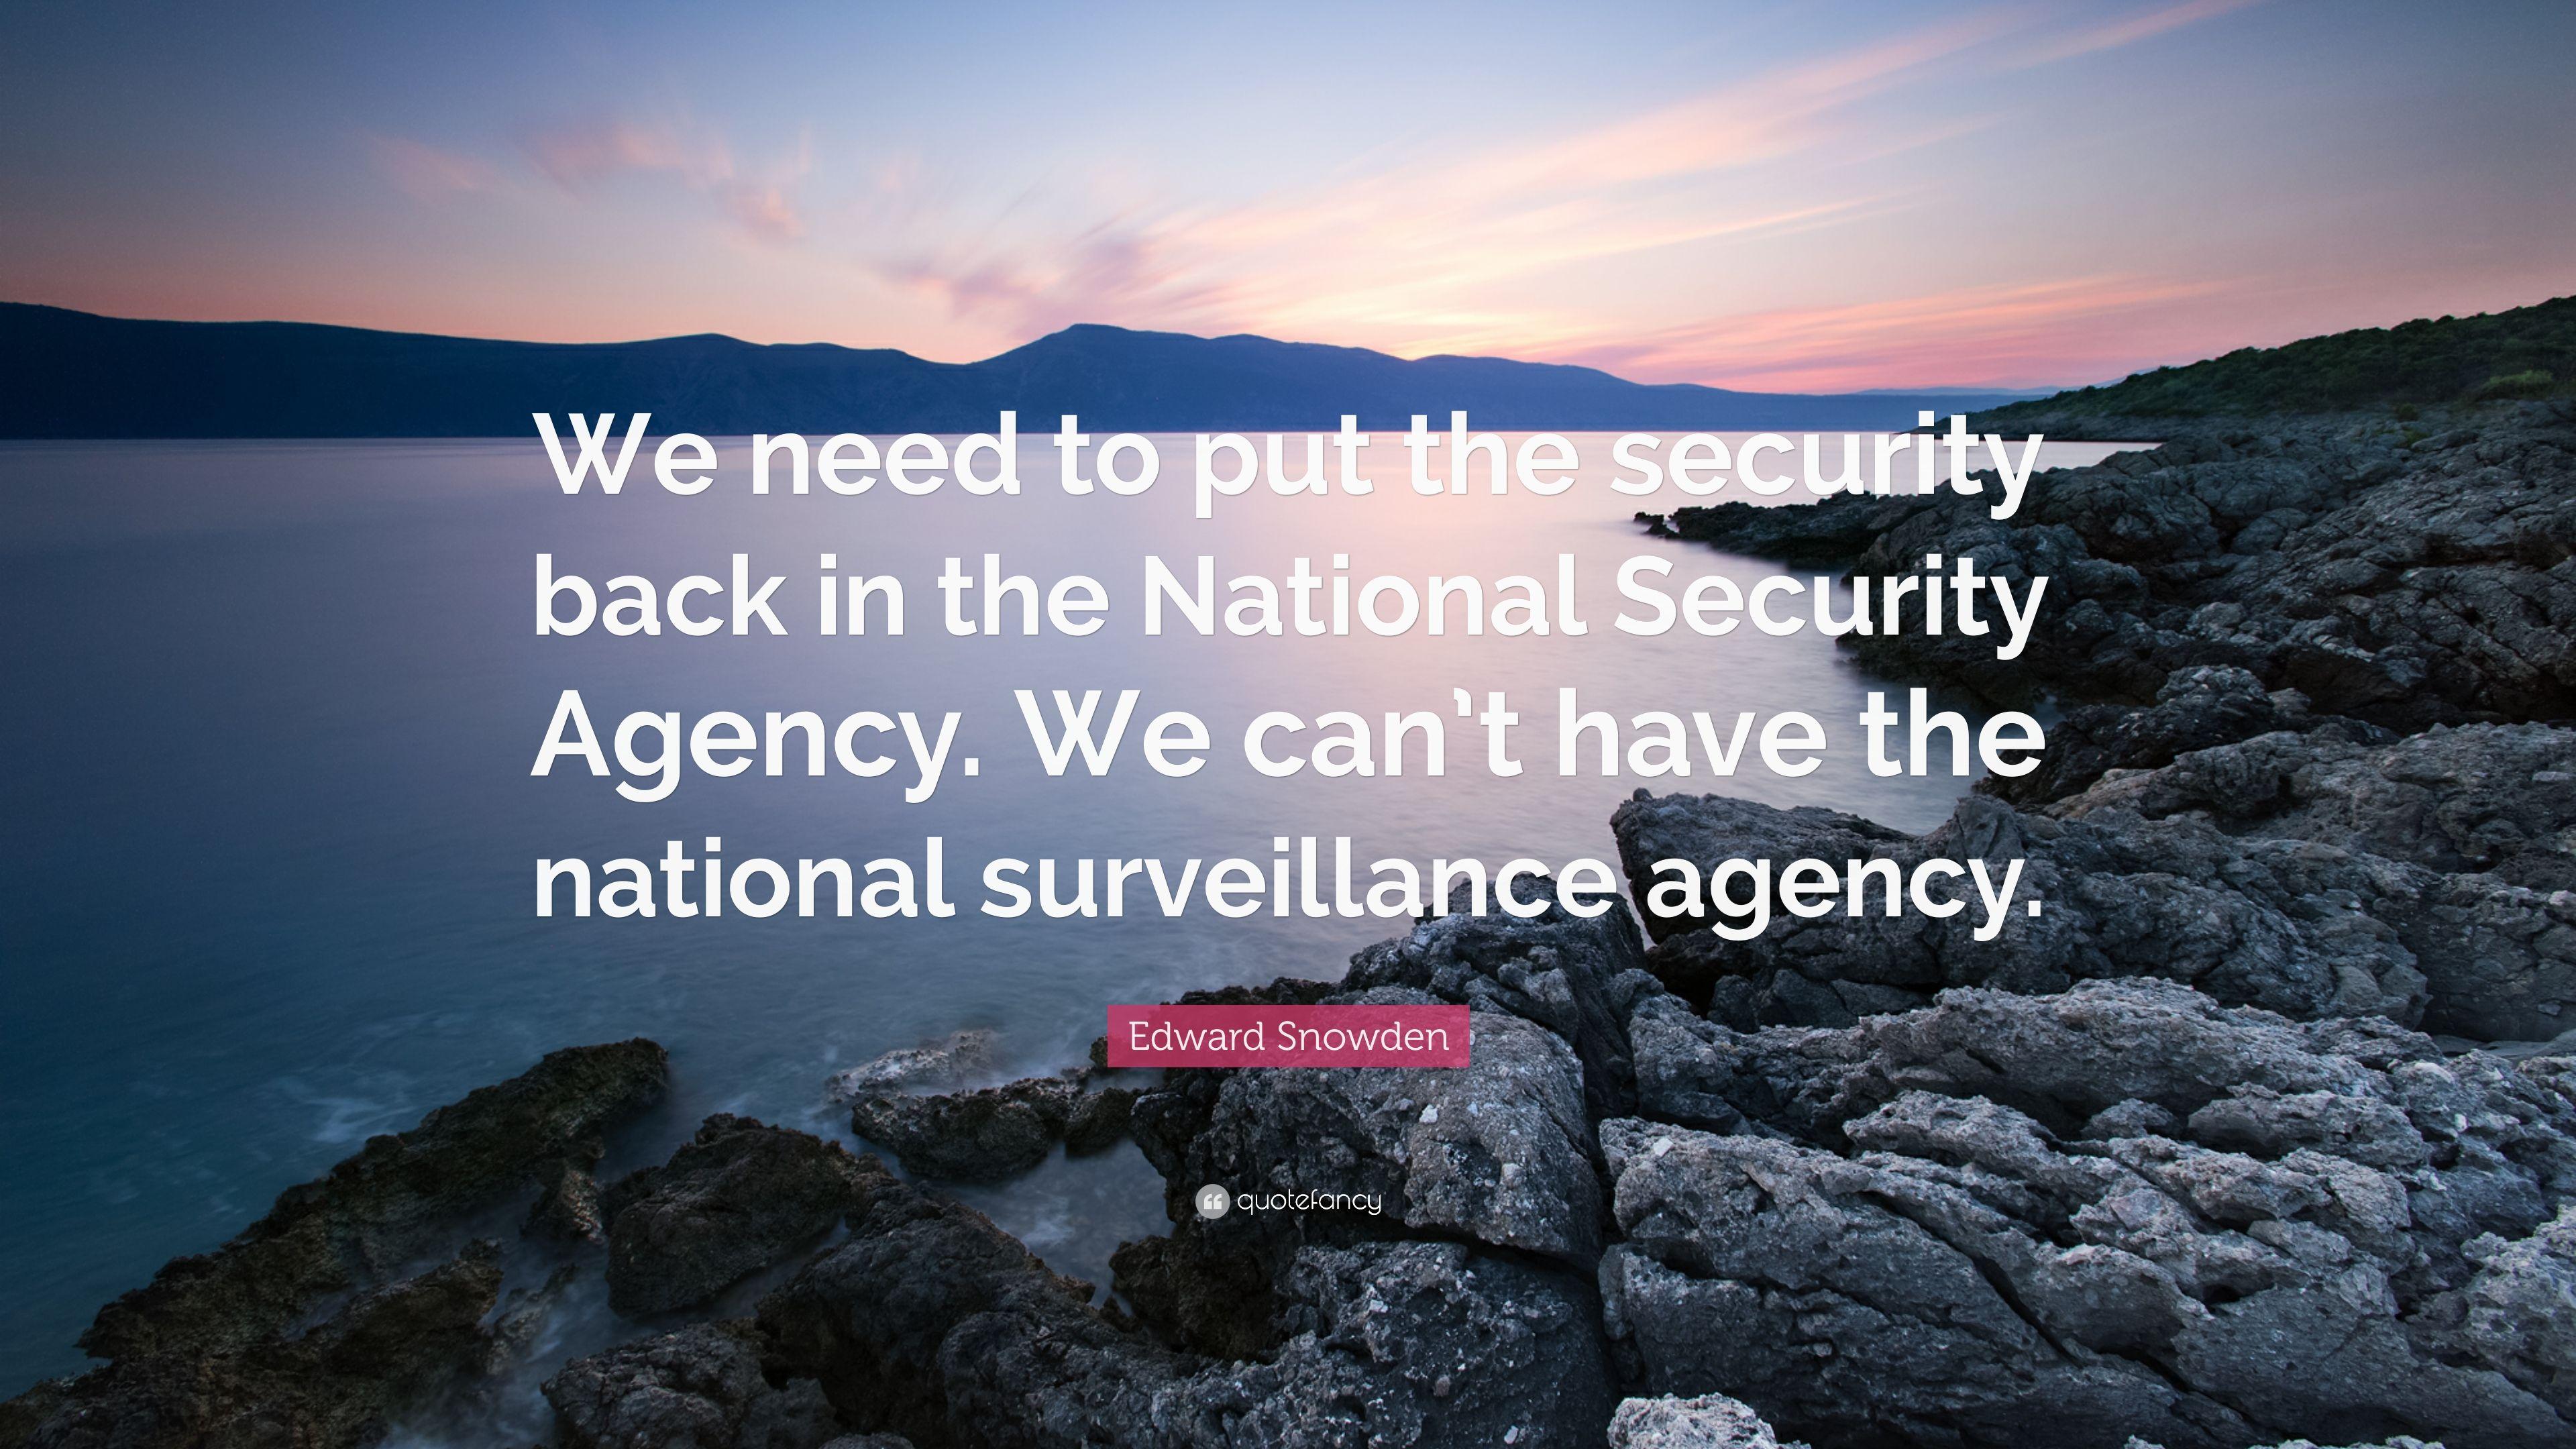 Edward Snowden Quote: “We need to put the security back in